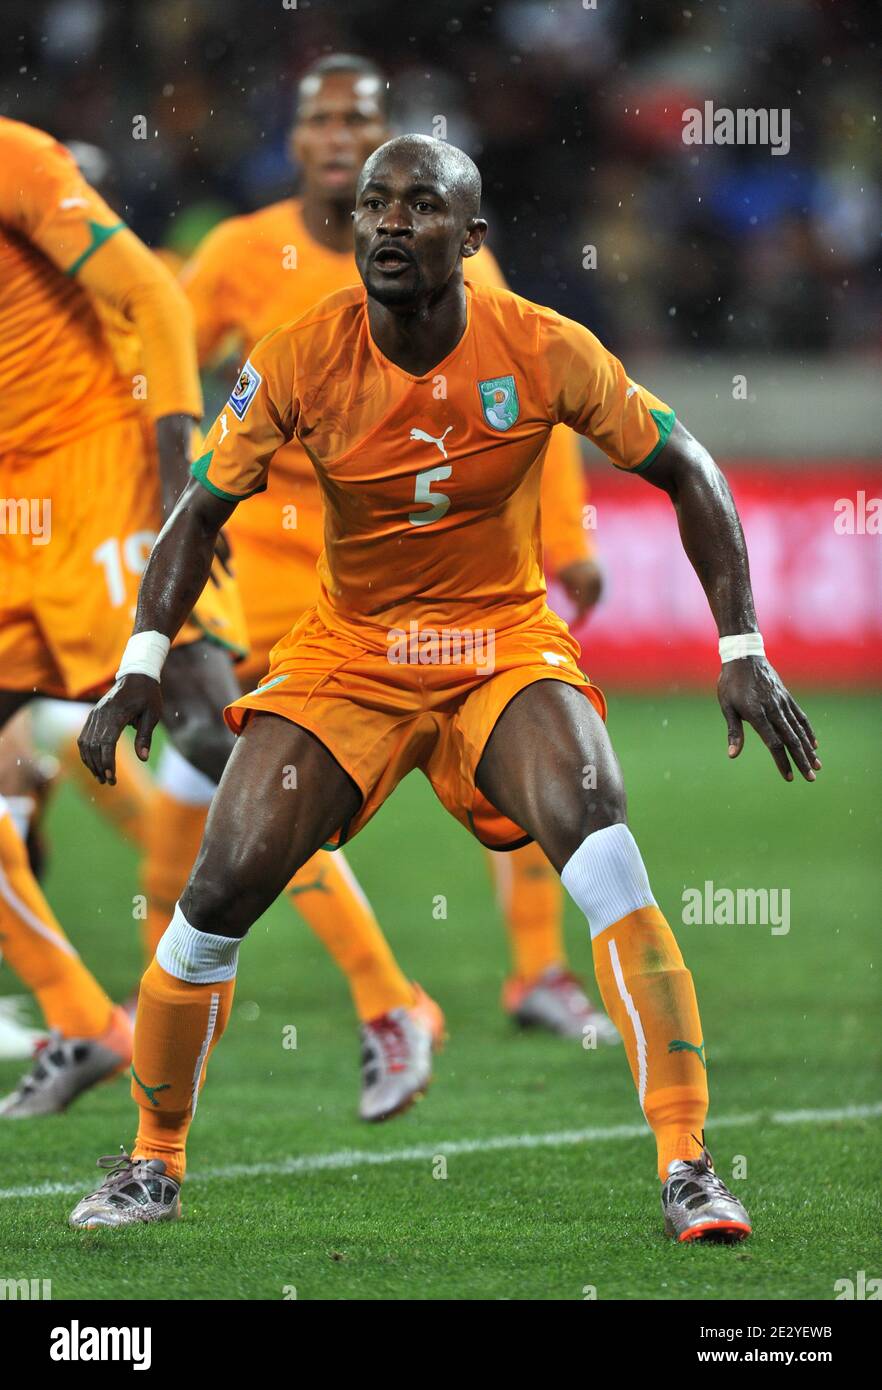 Ivory Coast's Didier Zokora during the 2010 FIFA World Cup soccer match, Group G, Ivory Coast vs Portugal at the Nelson Mandela Bay Stadium, in Port Elisabeth, South Africa on June 15, 2010. The match ended in a 0-0 draw. Photo by Christophe Guibbaud/Cameleon/ABACAPRESS.COM Stock Photo